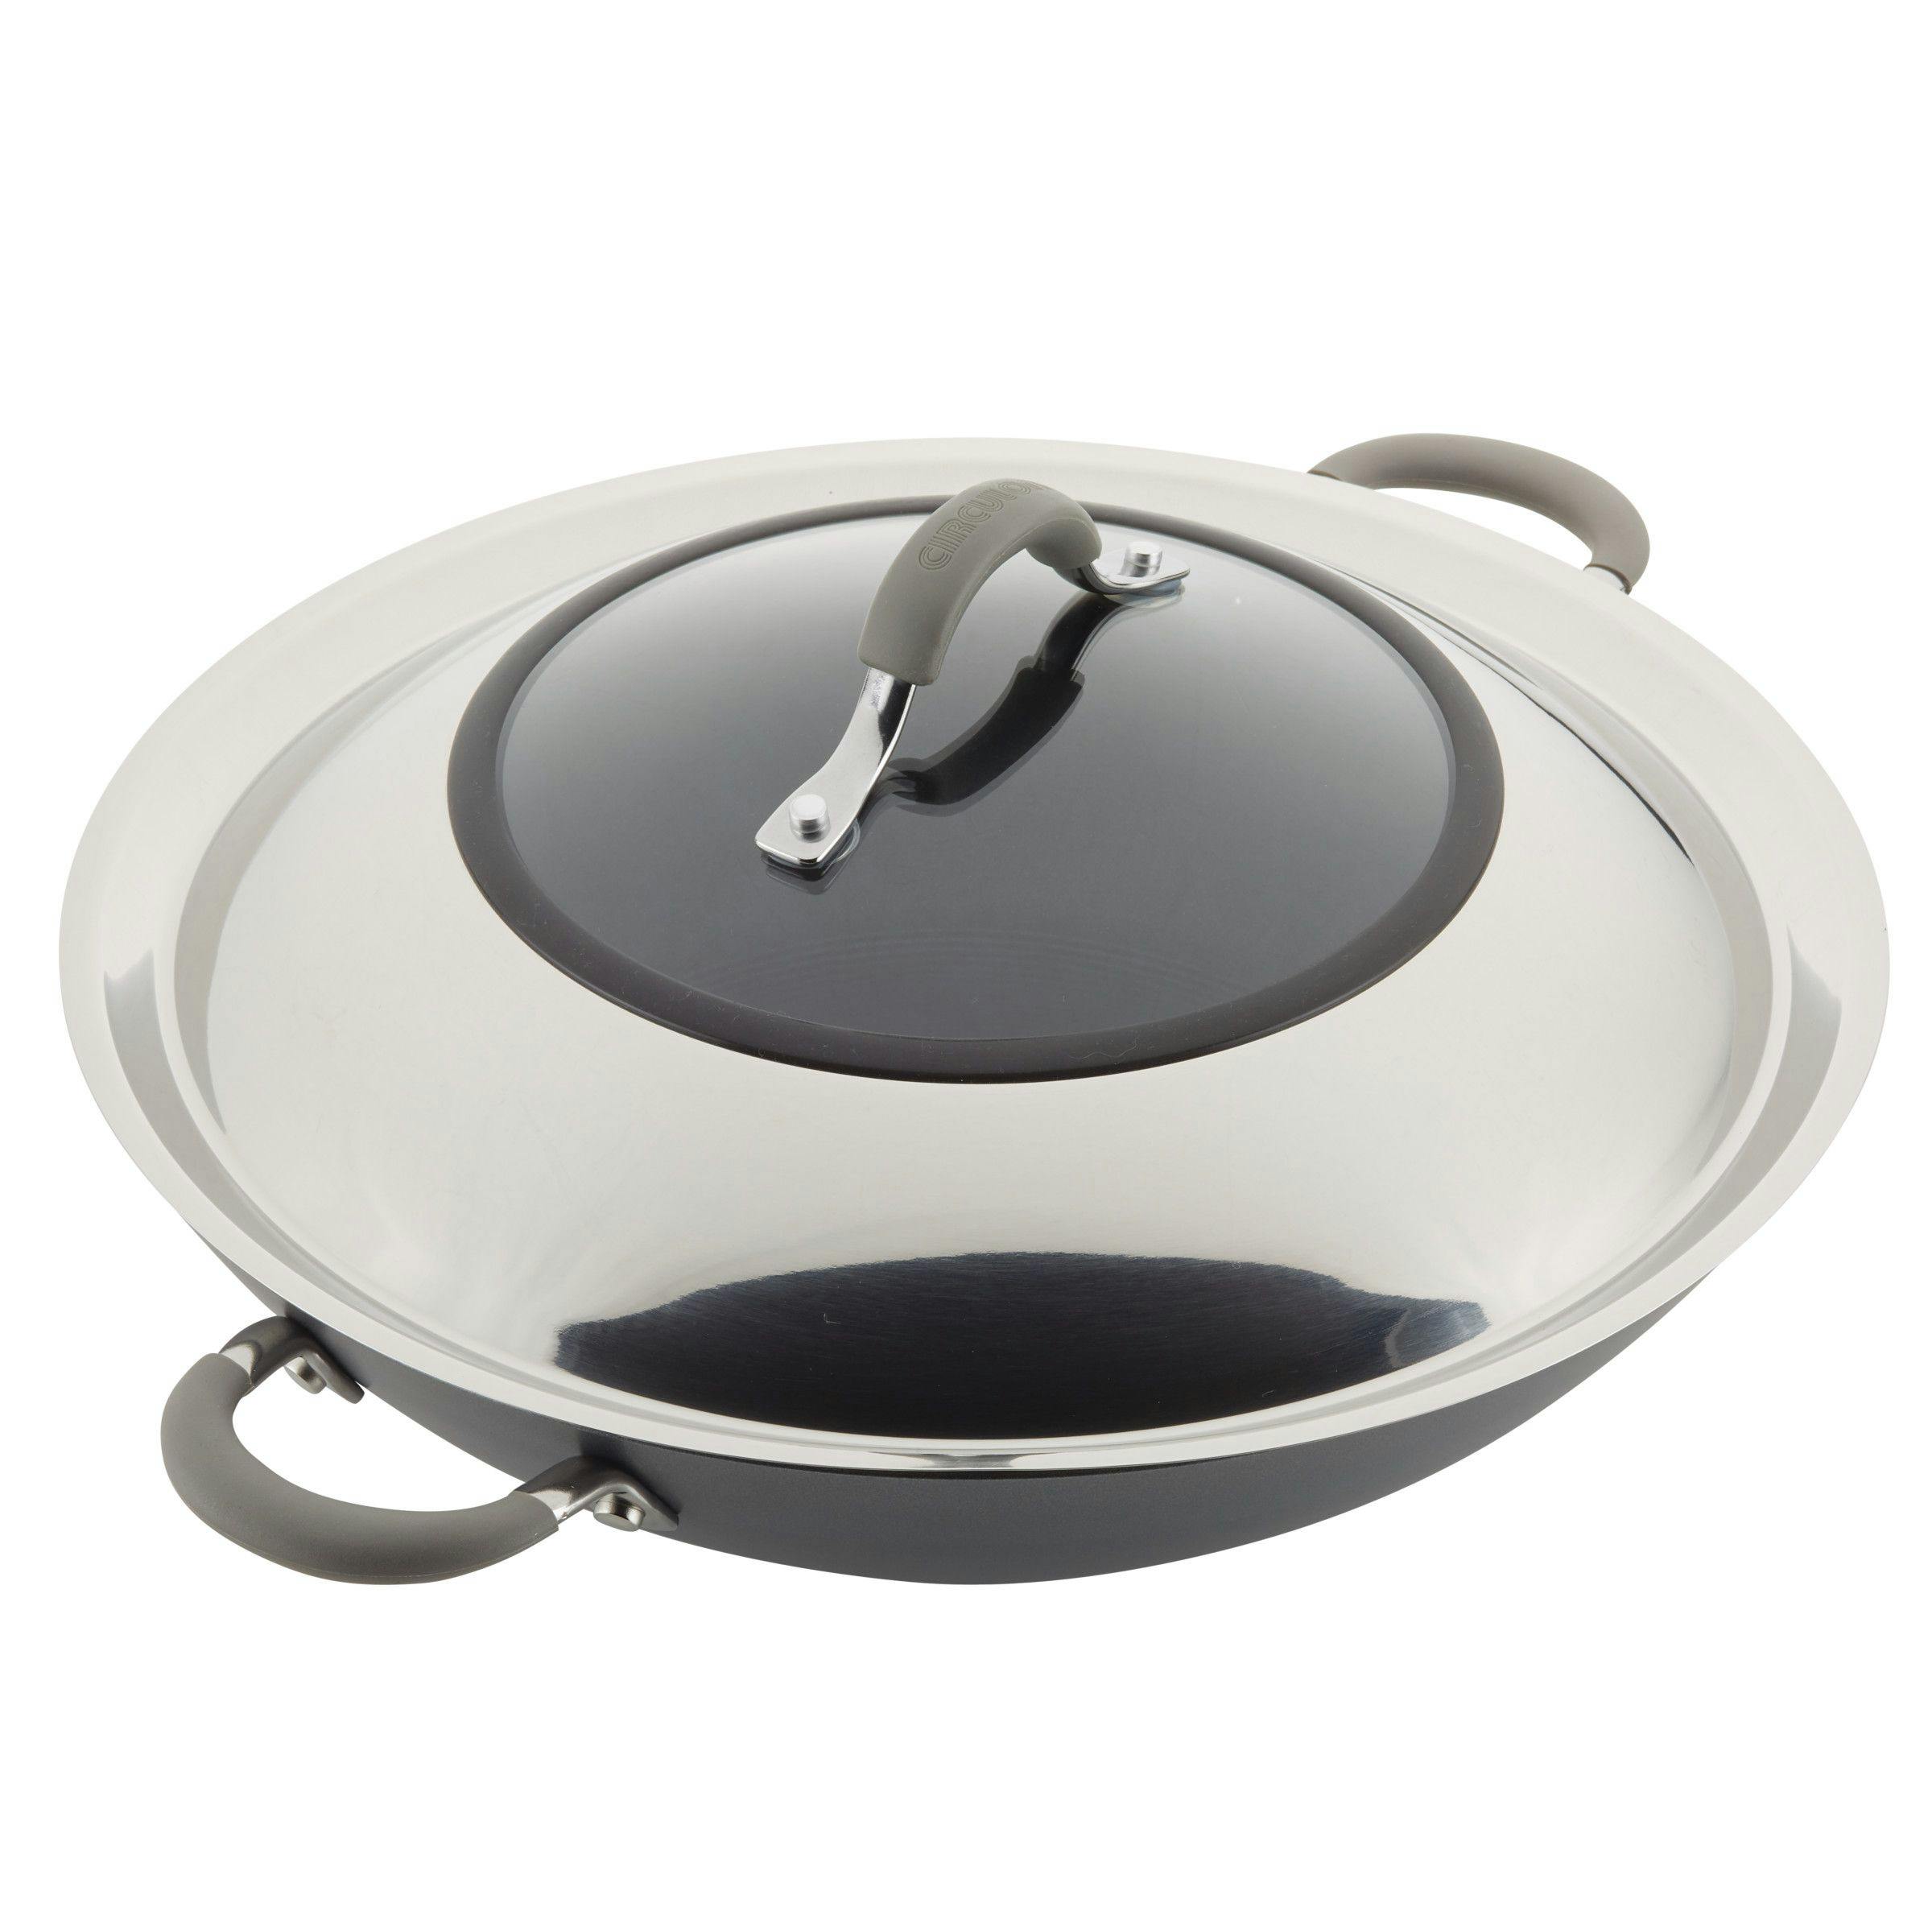 Circulon Elementum Hard-Anodized Nonstick Wok with Side Handles and Lid, 14-Inch, Oyster Gray